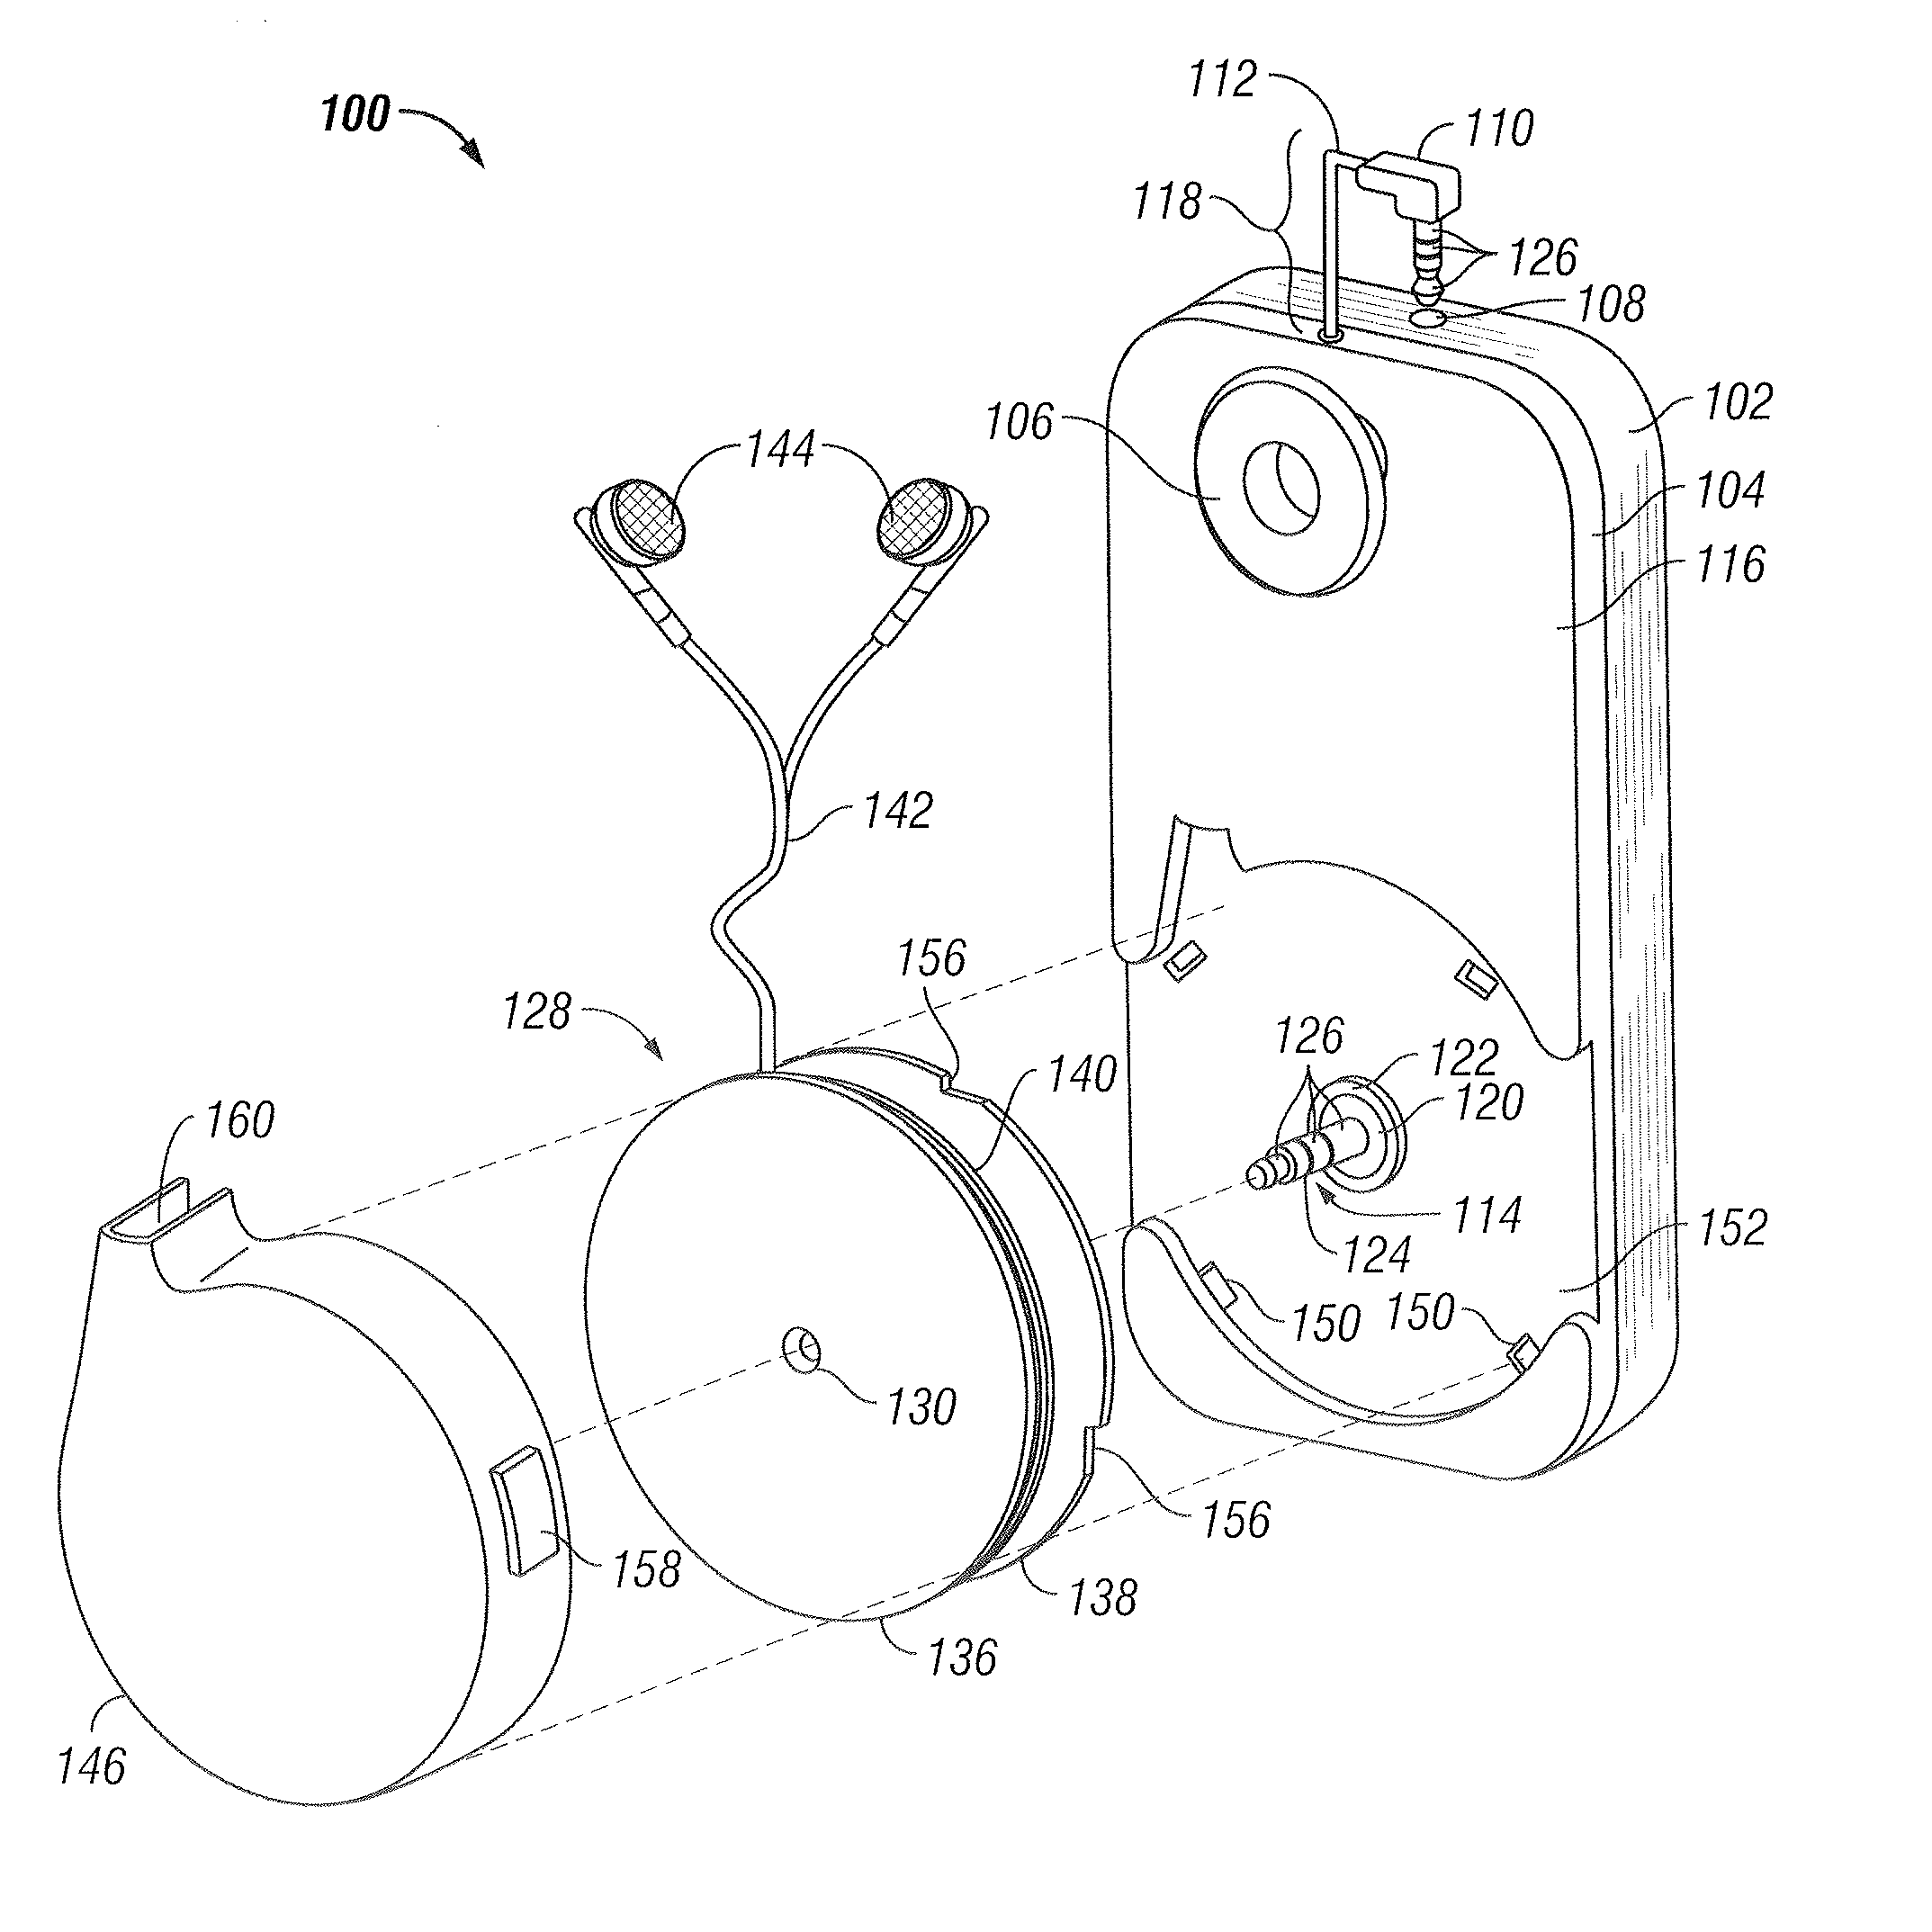 Electronic device carrying system with retractable transducer assembly